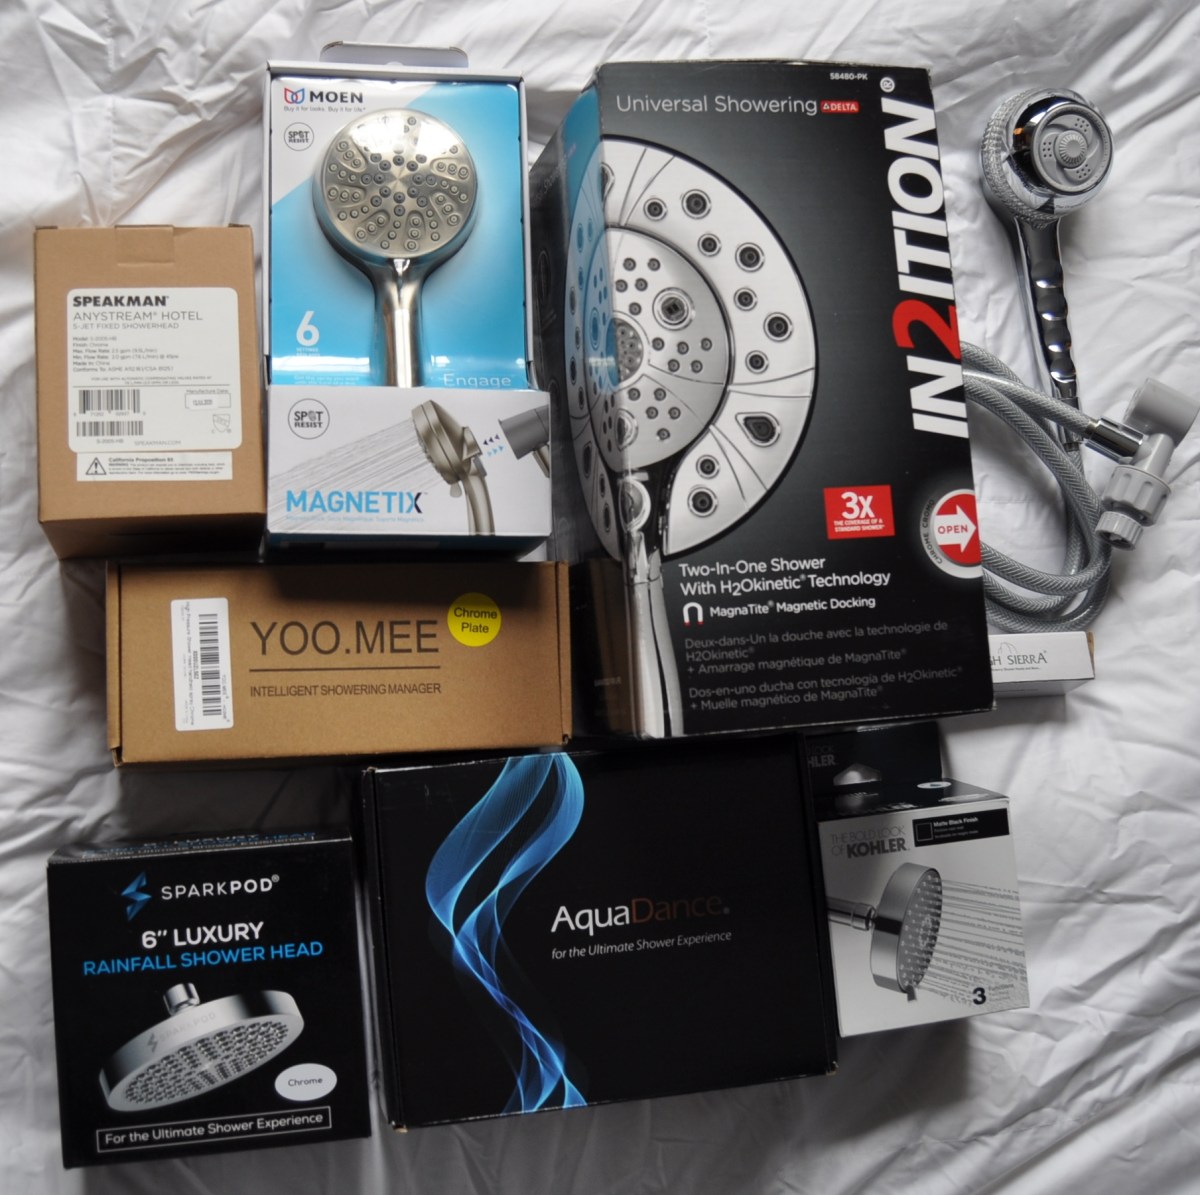 A group of the Best High-Pressure Shower Heads still in their boxes before testing.